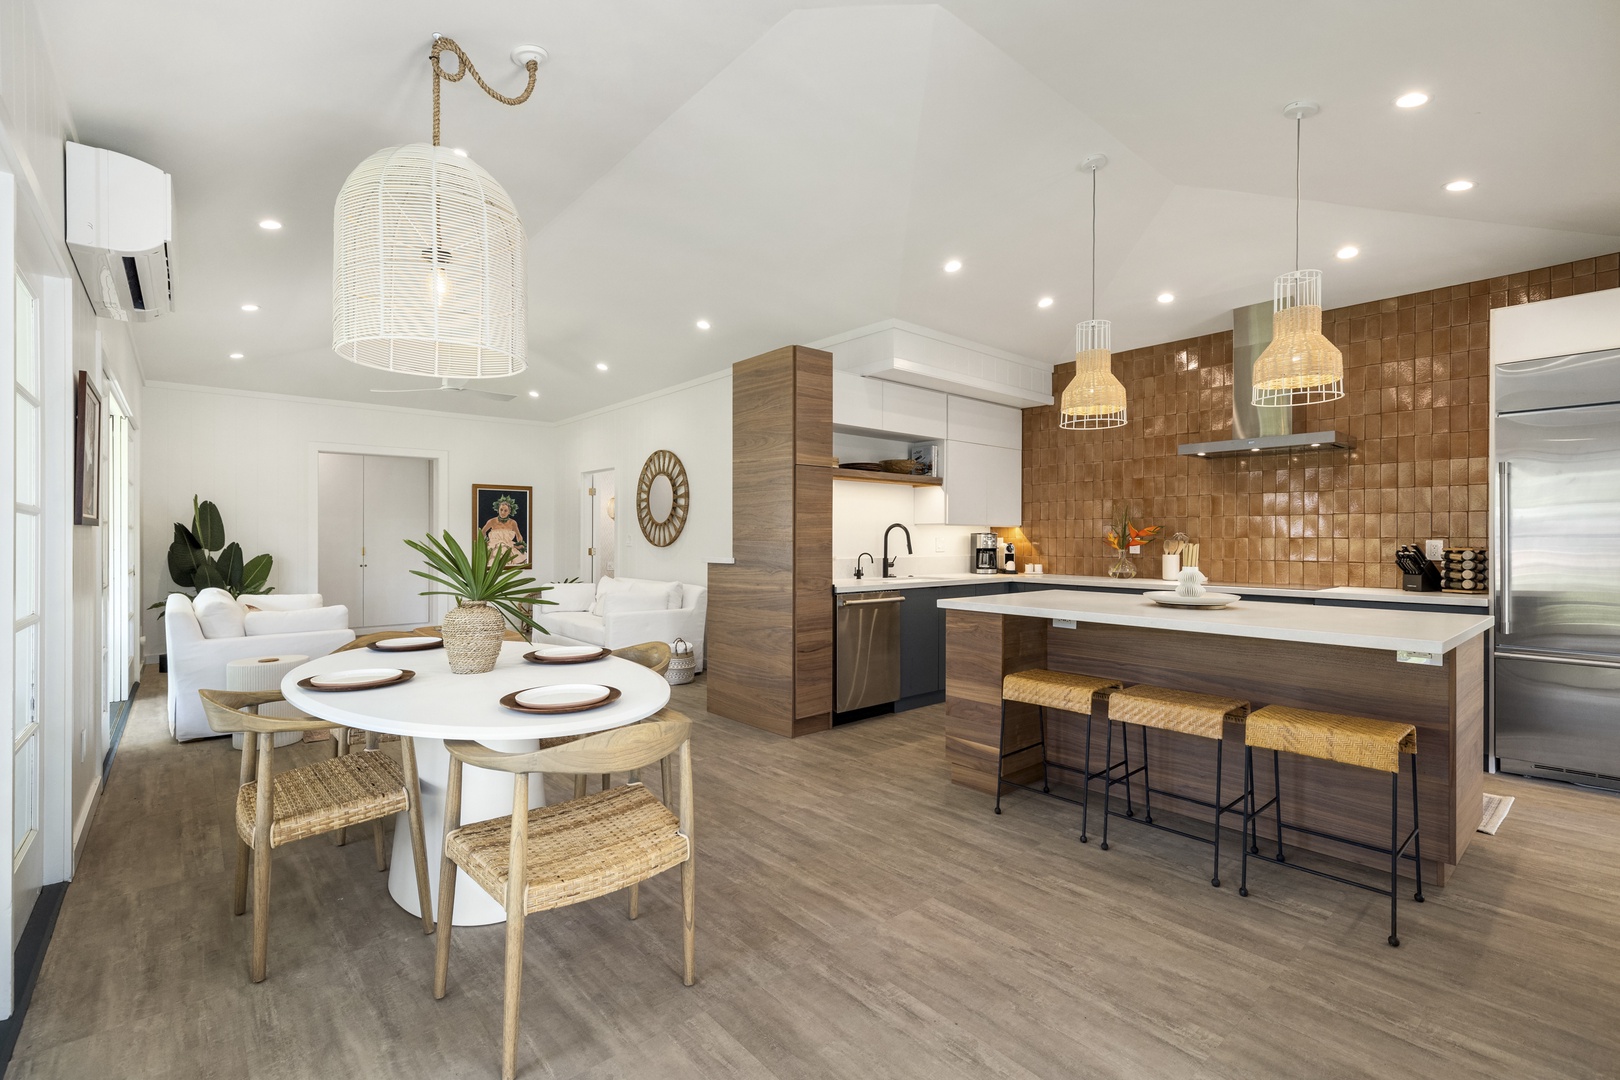 Kailua Vacation Rentals, Lanikai Hideaway - Open concept connect dining and kitchen with lofted ceilings throughout